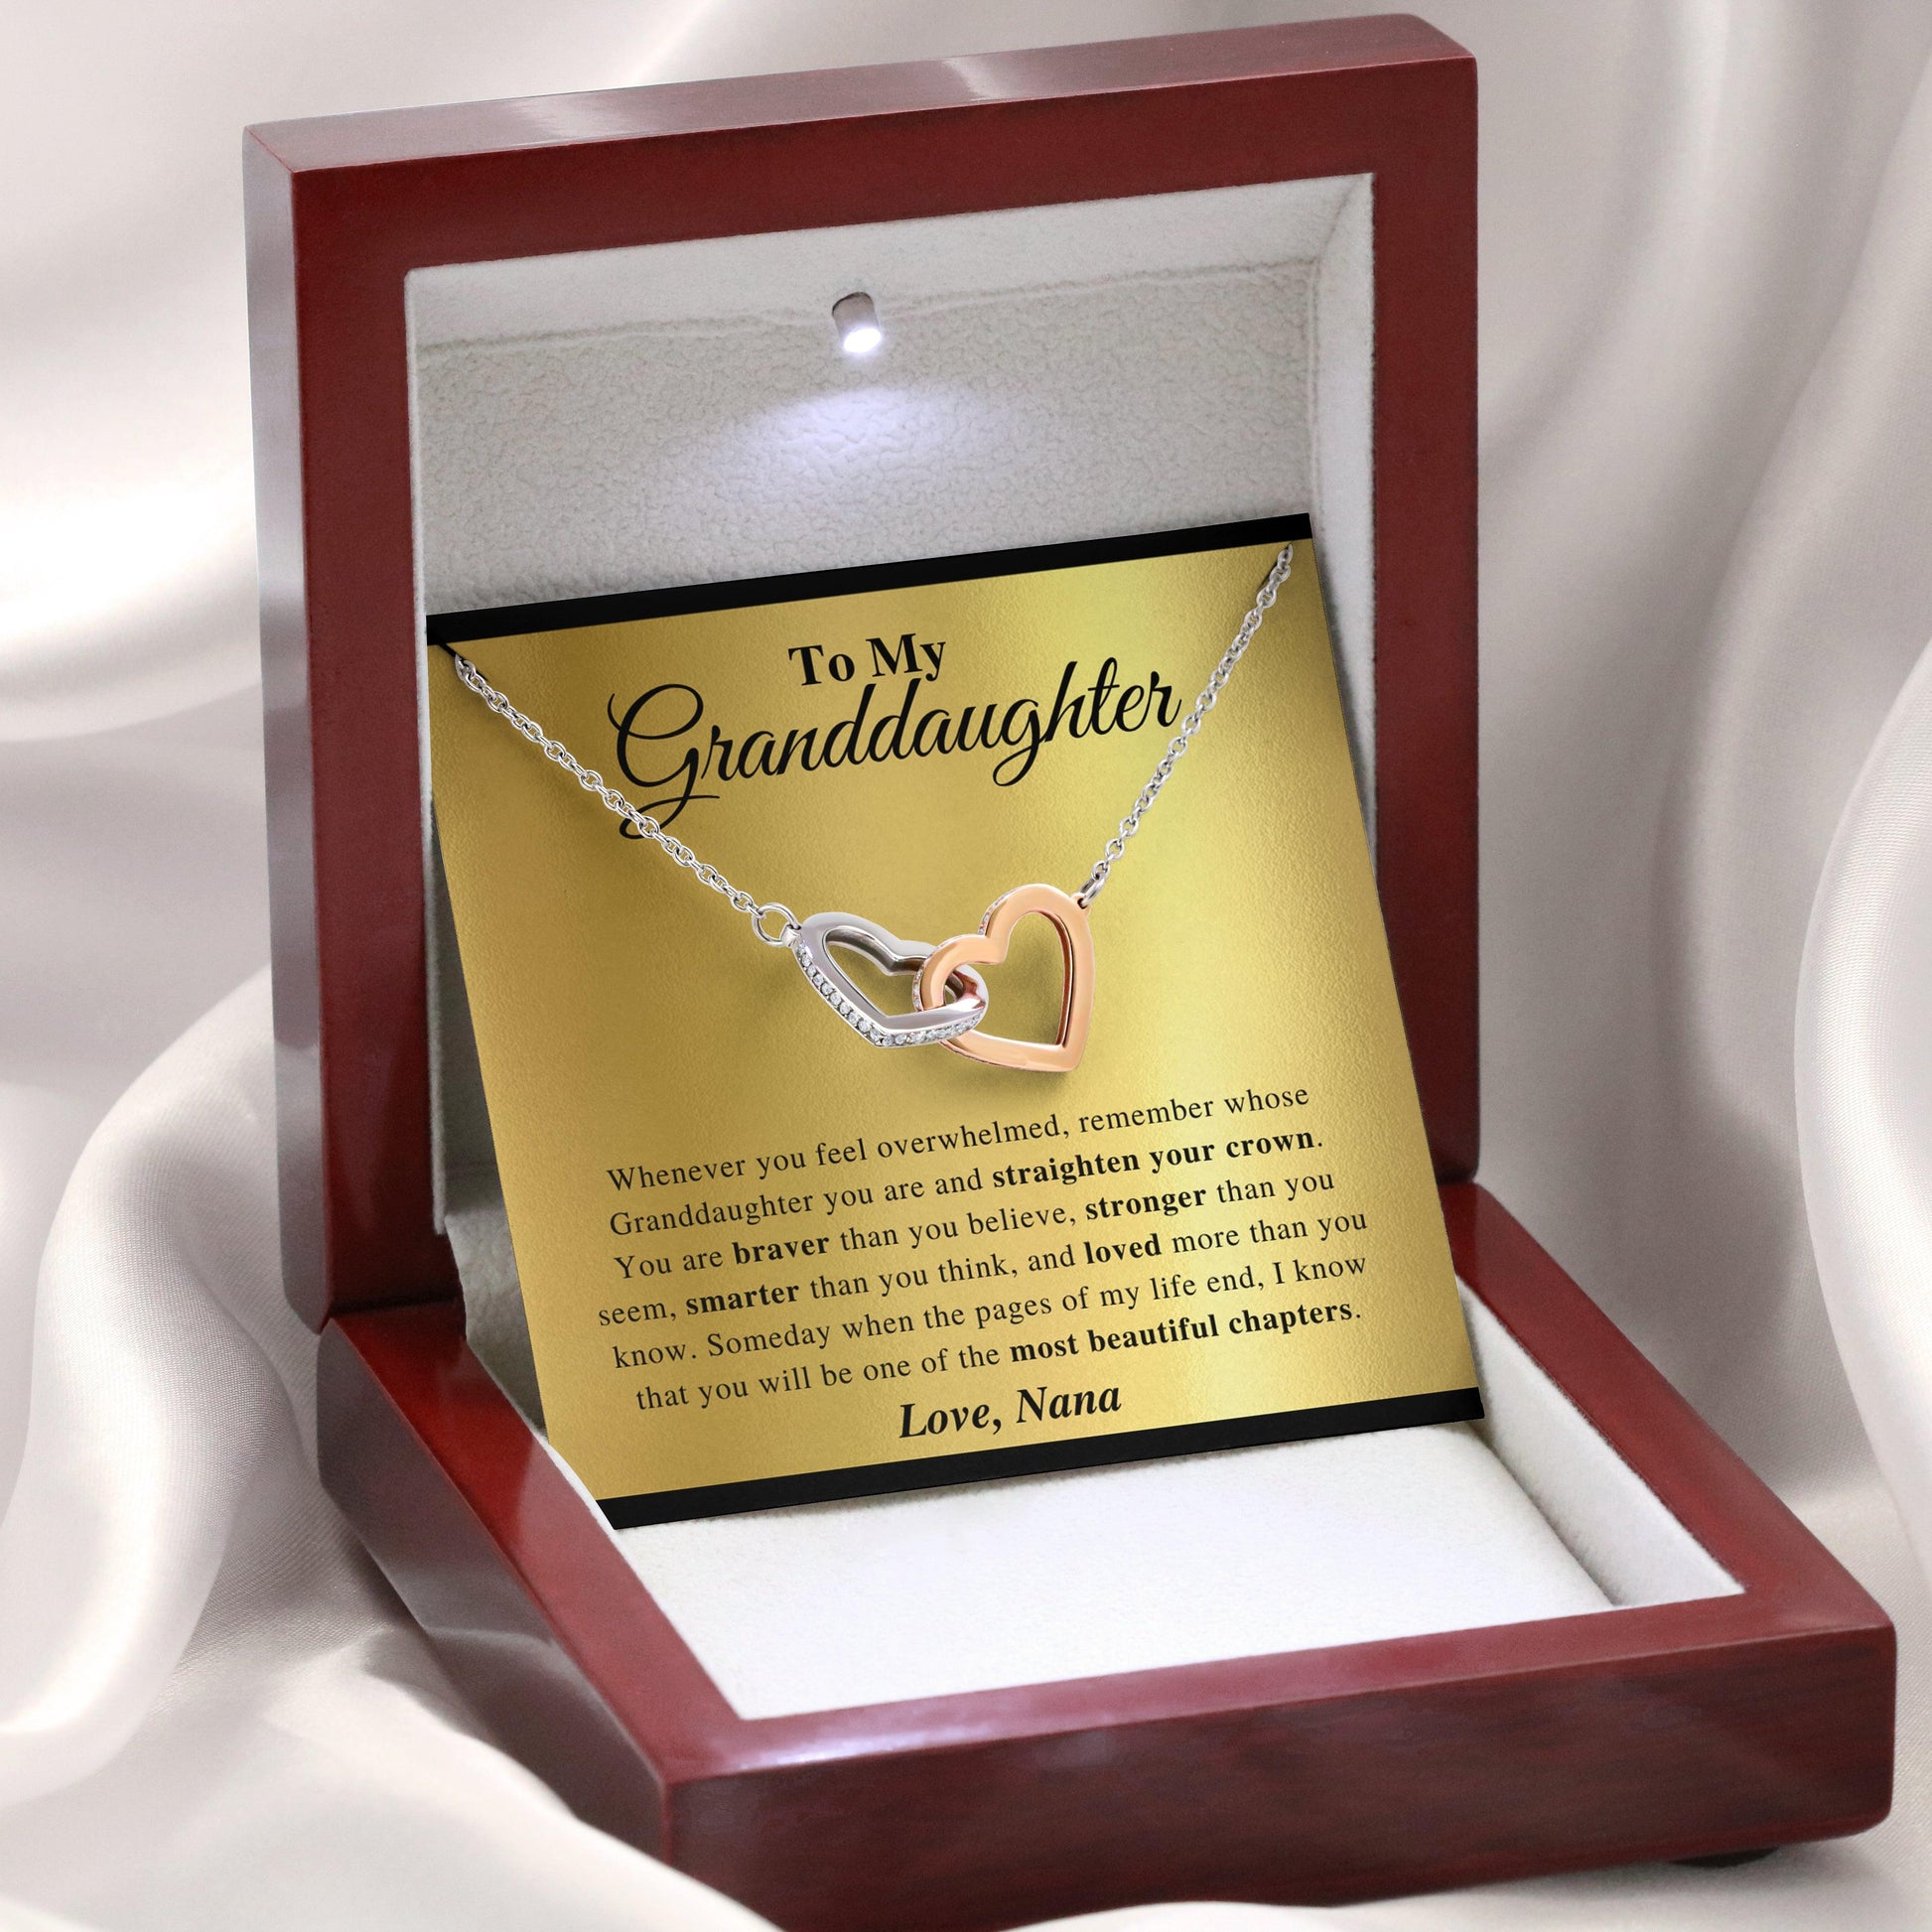 Jewelry gifts Granddaughter - Believe In You - Interlocking Hearts Necklace - Belesmé - Memorable Jewelry Gifts